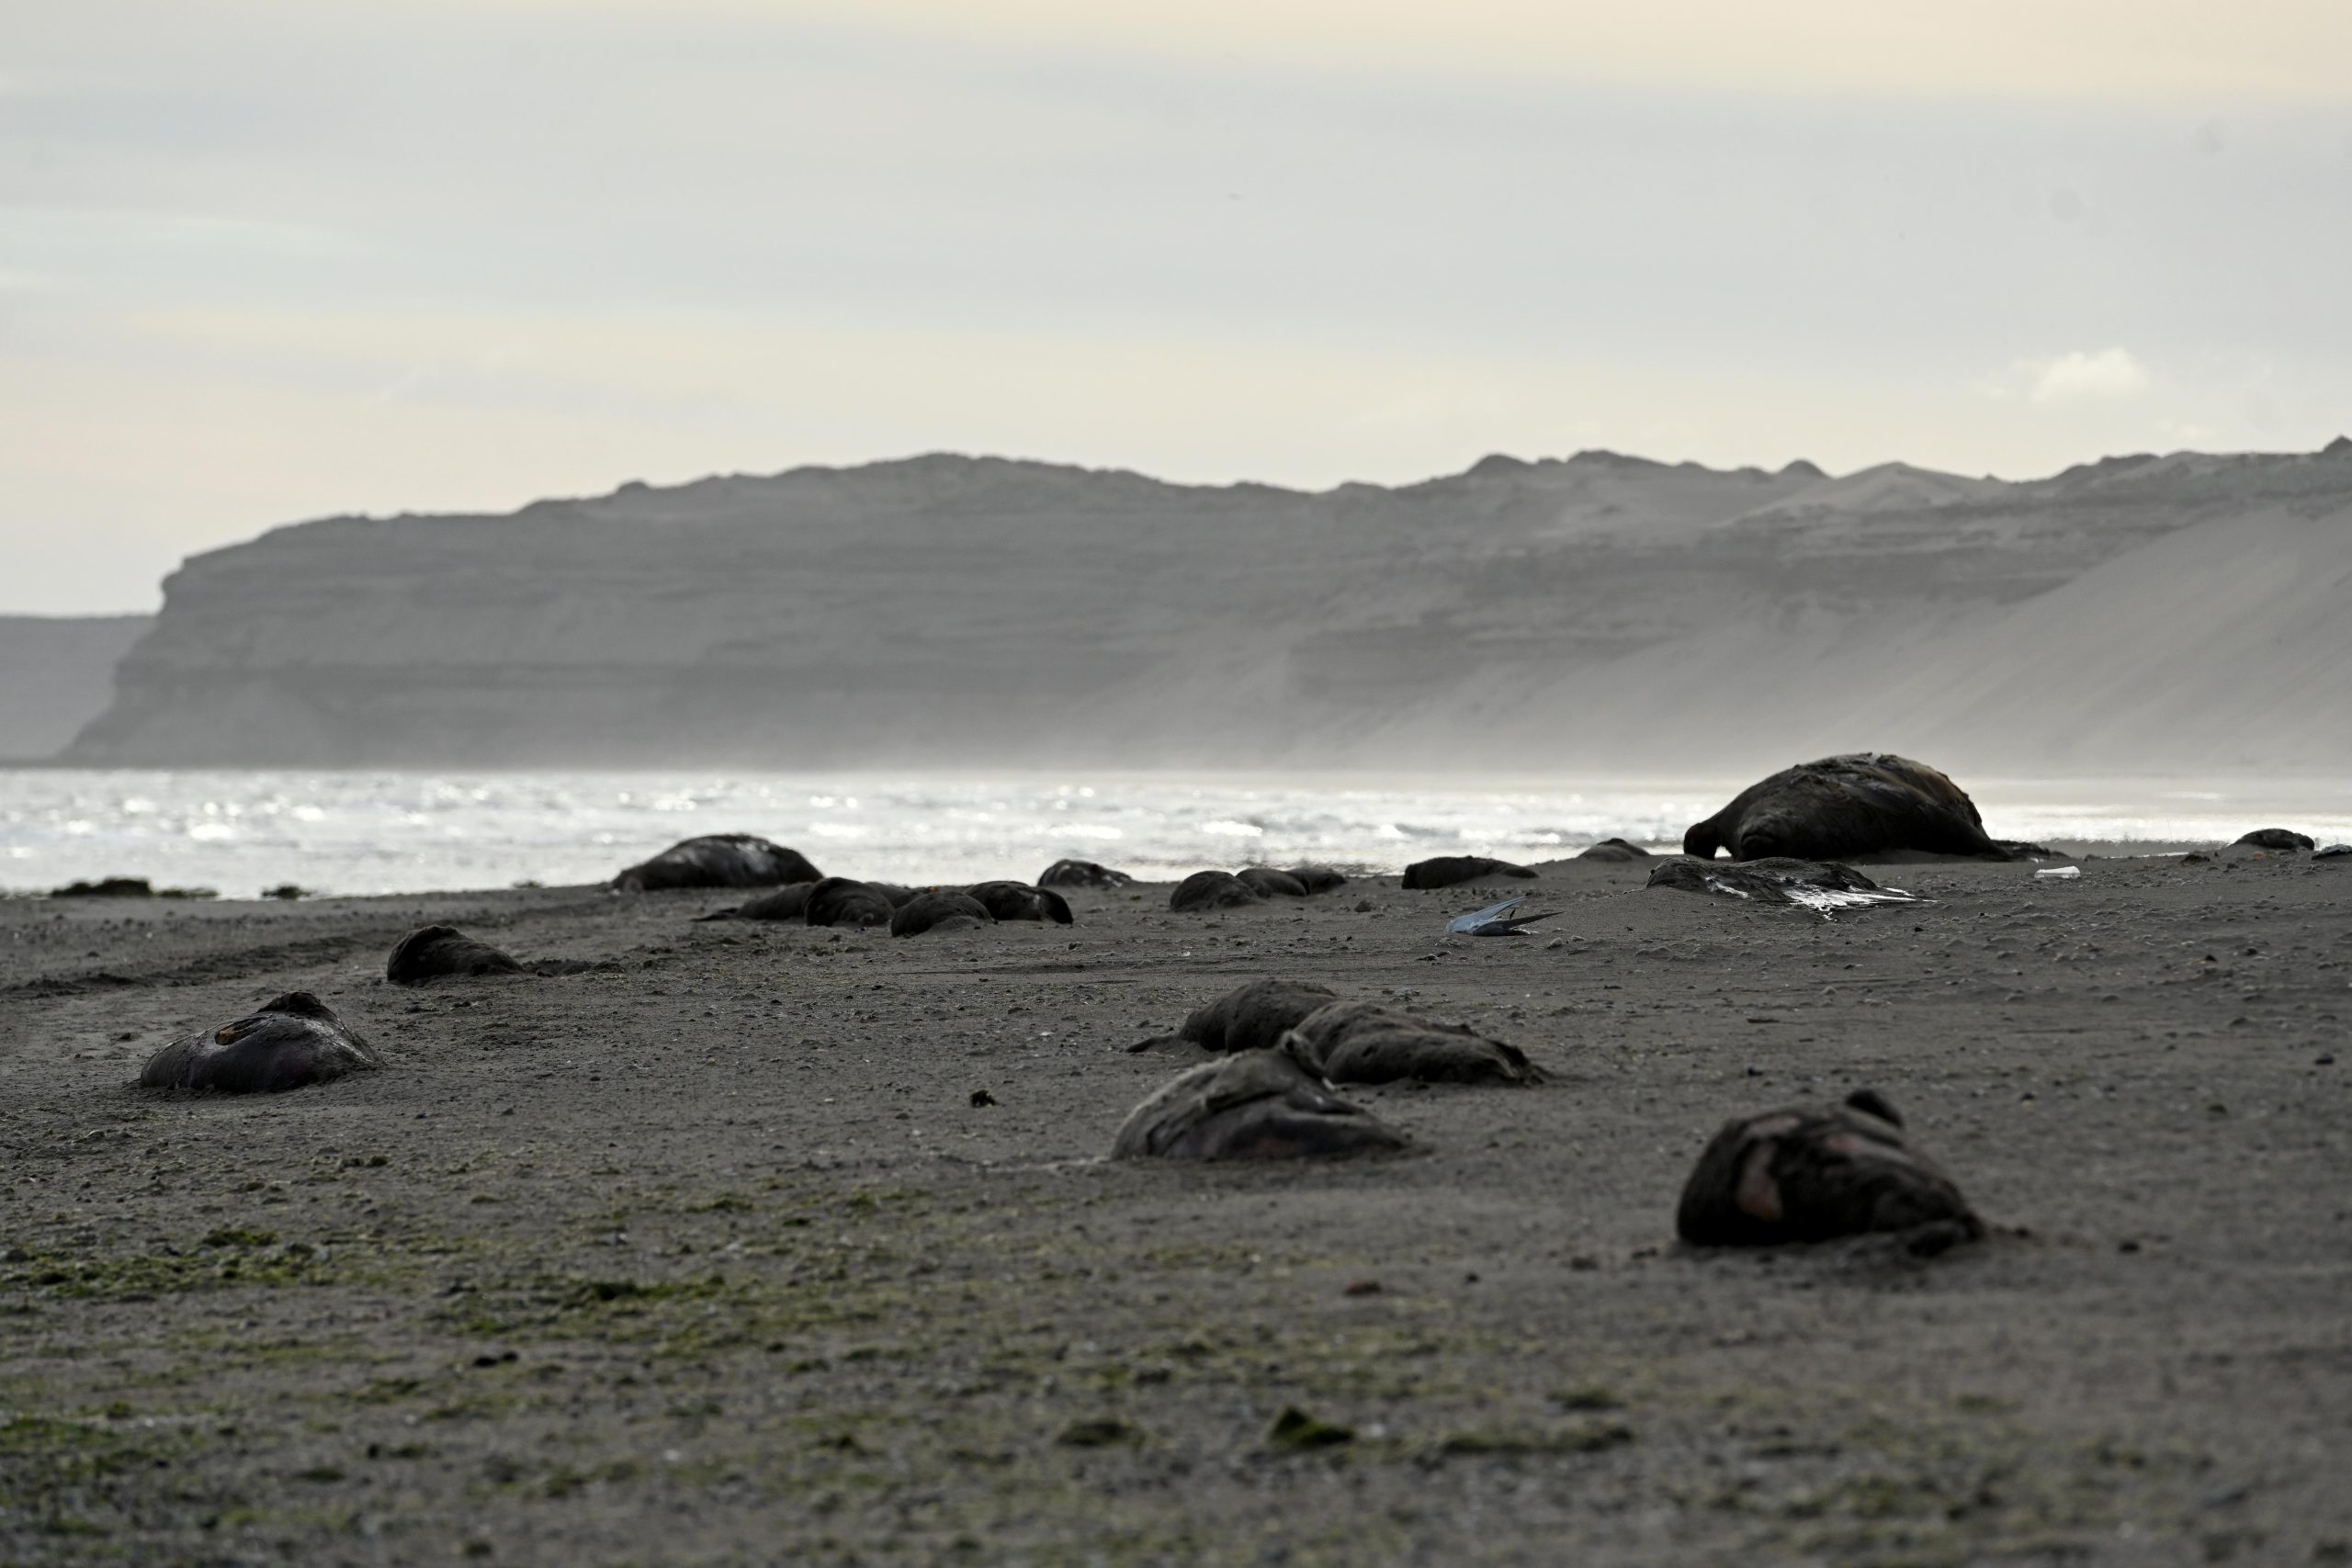 Elephant-Seals-Dead-on-Beach-in-Argentina-scaled.jpg